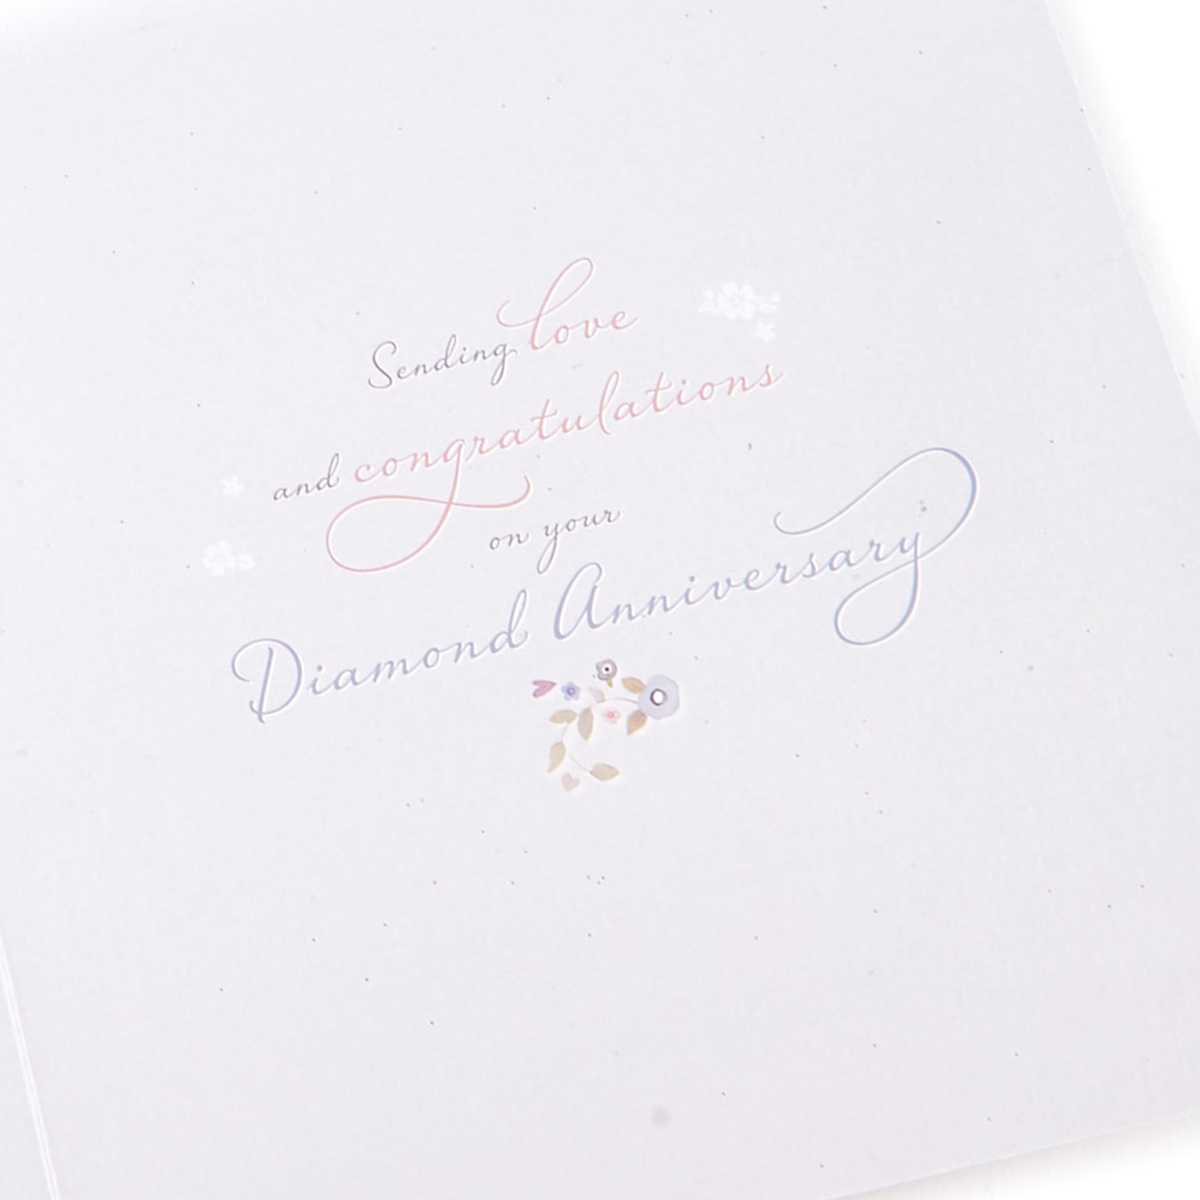 Boutique Collection Diamond Anniversary Card - 60 Years Of Love